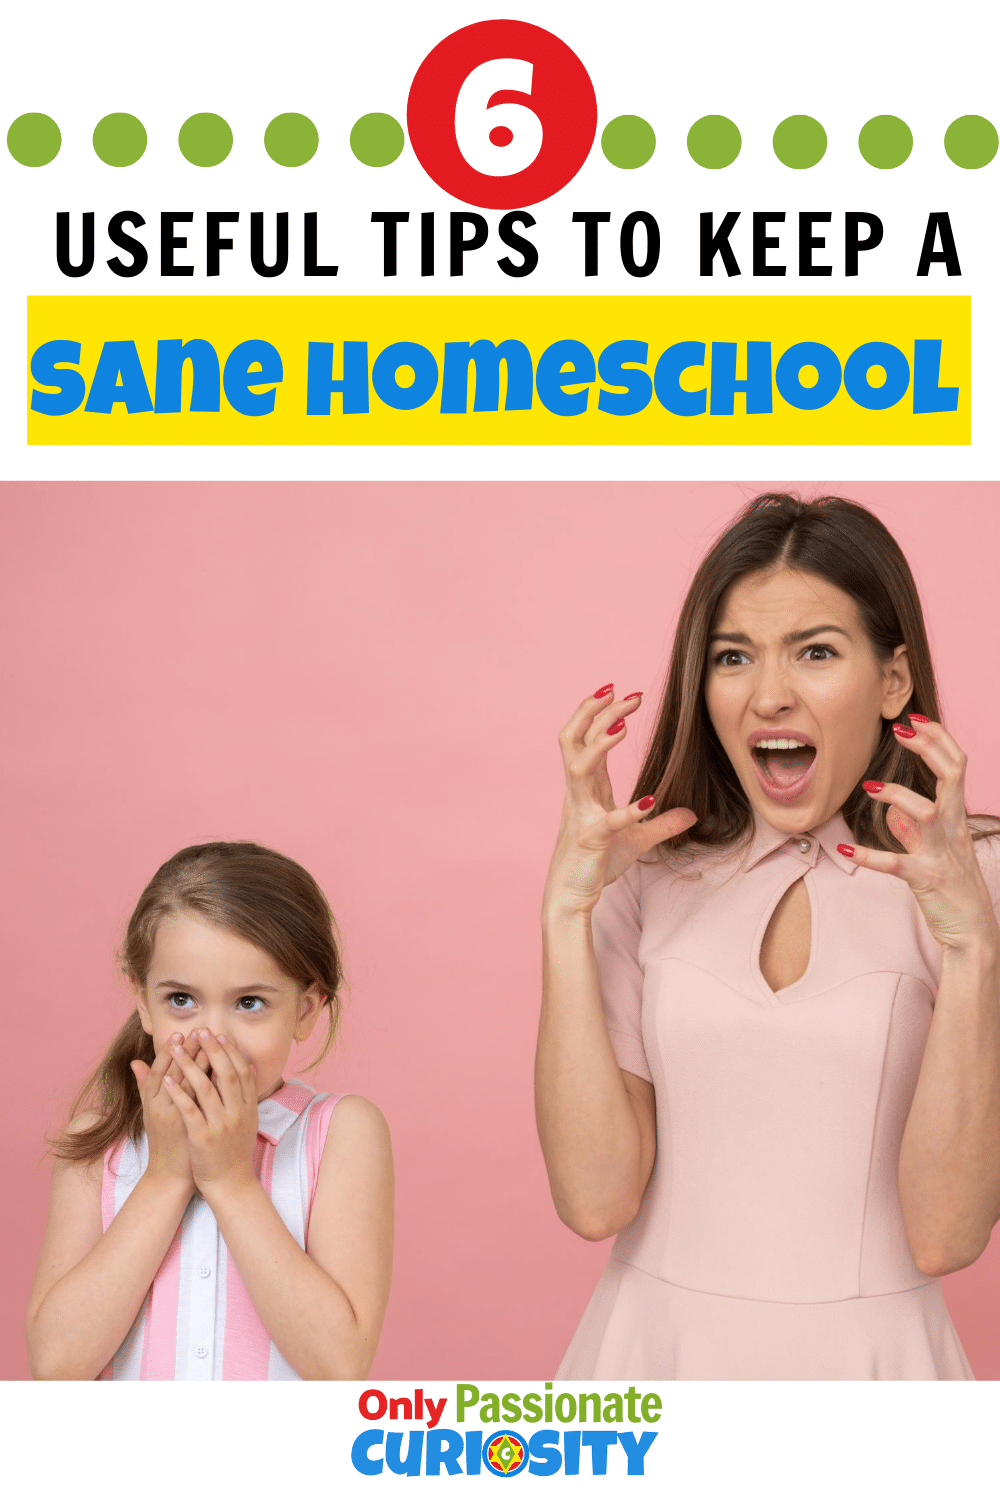 All of us have a lot to do and a lot going on--which leads me to Homeschool Scheduling 101 topic. Here are tips to stay sane while homeschooling. #Homeschool #HomeschoolTips #Scheduling